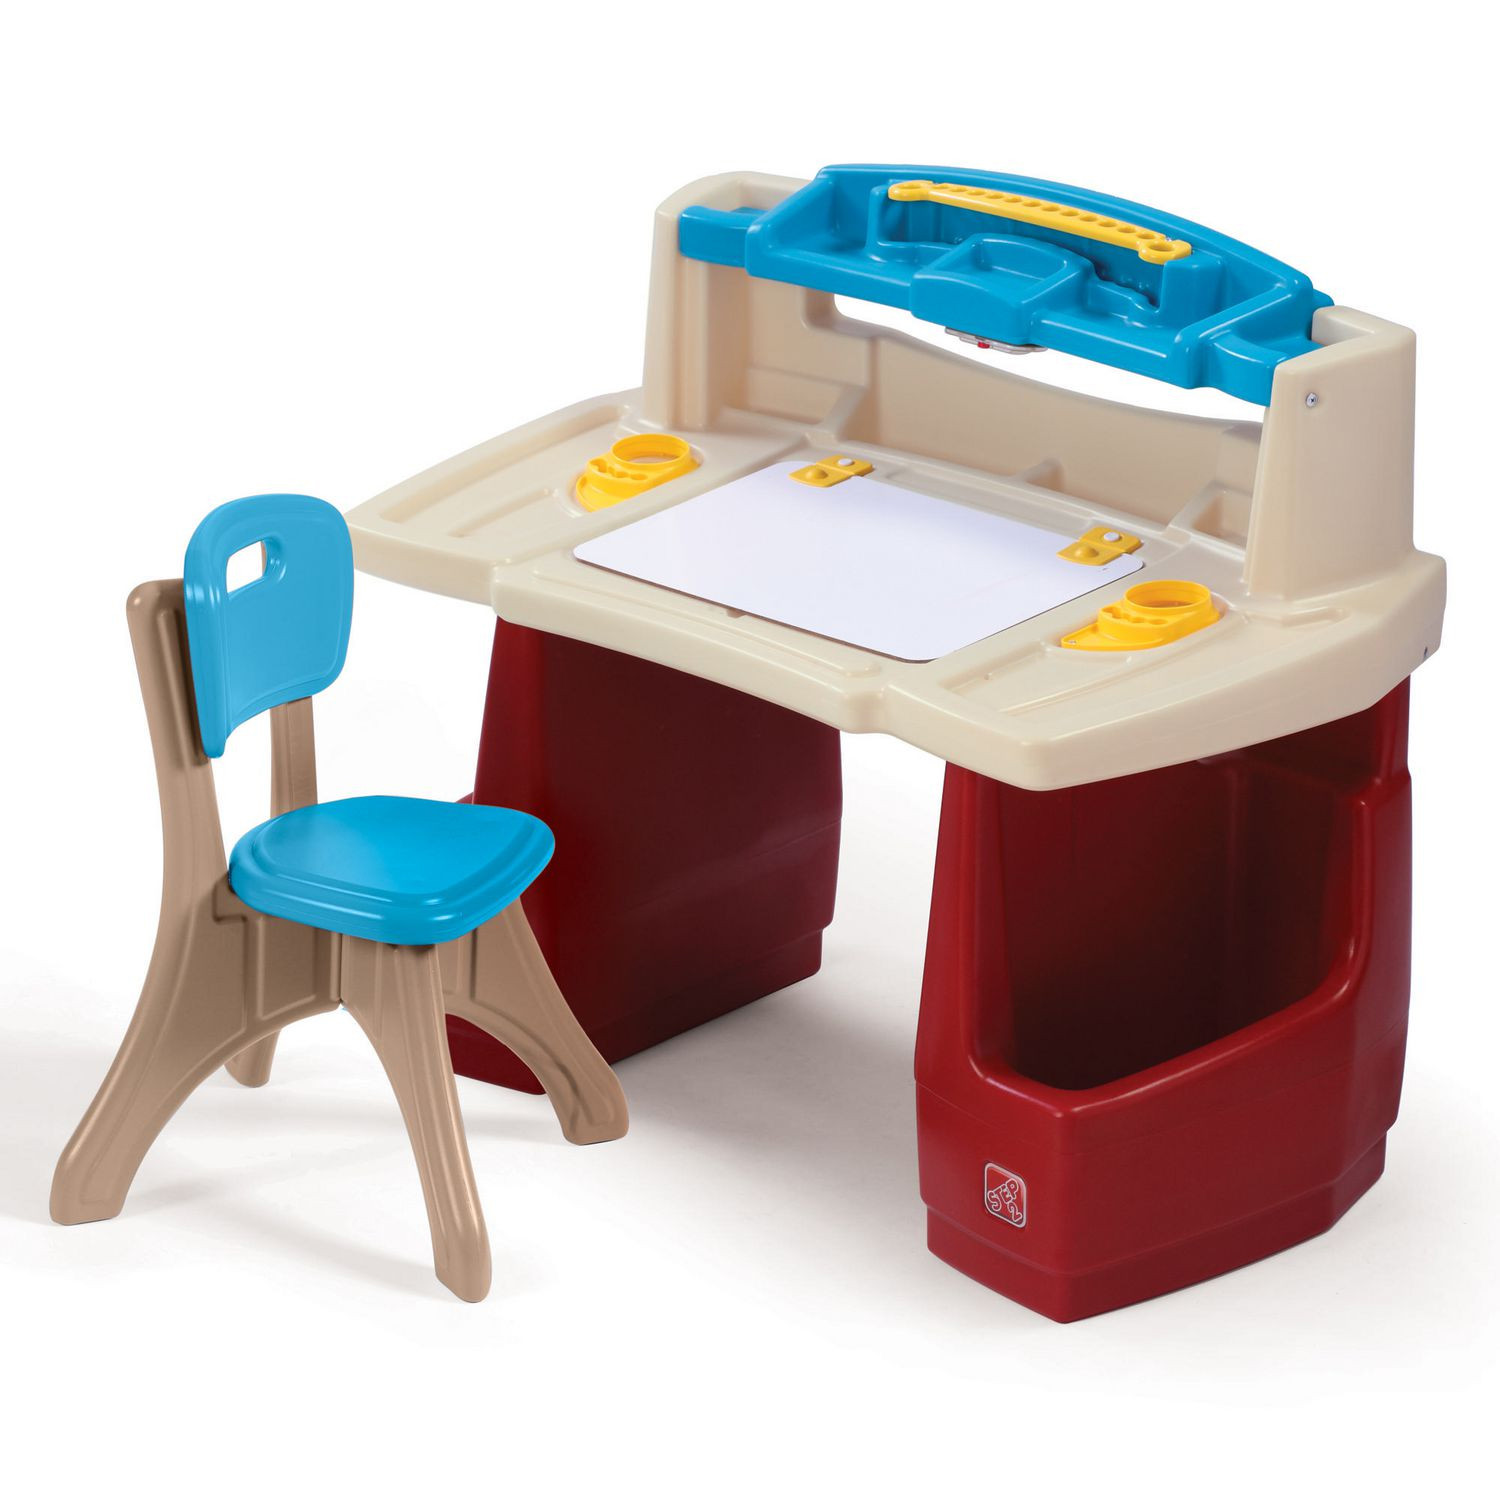 Kids Art Table
 Step2 Deluxe Art Master Desk Kids Art Table with Storage